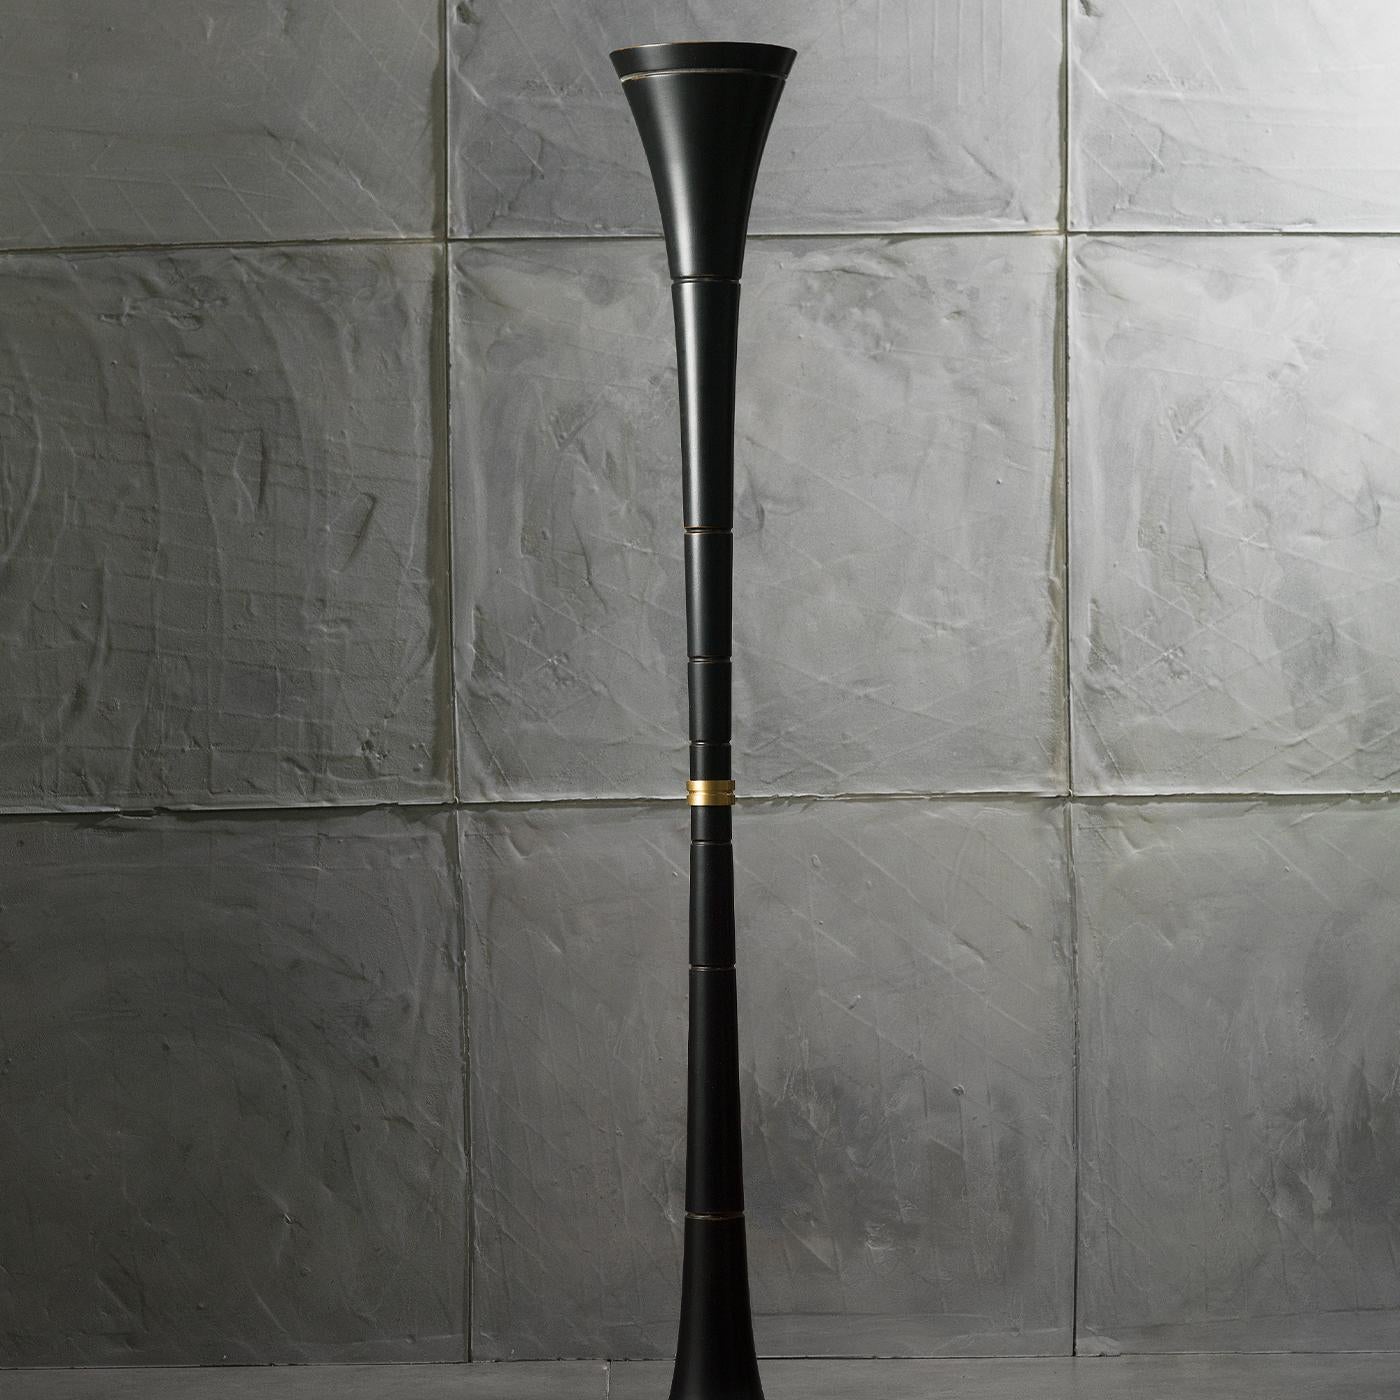 This simple yet classy cone-shaped floor lamp is perfect for every kind of environment and setting. The shape is made in antiqued-black wood and it has an insert in the middle made in satin brass. The light comes evenly out of the cone by using a